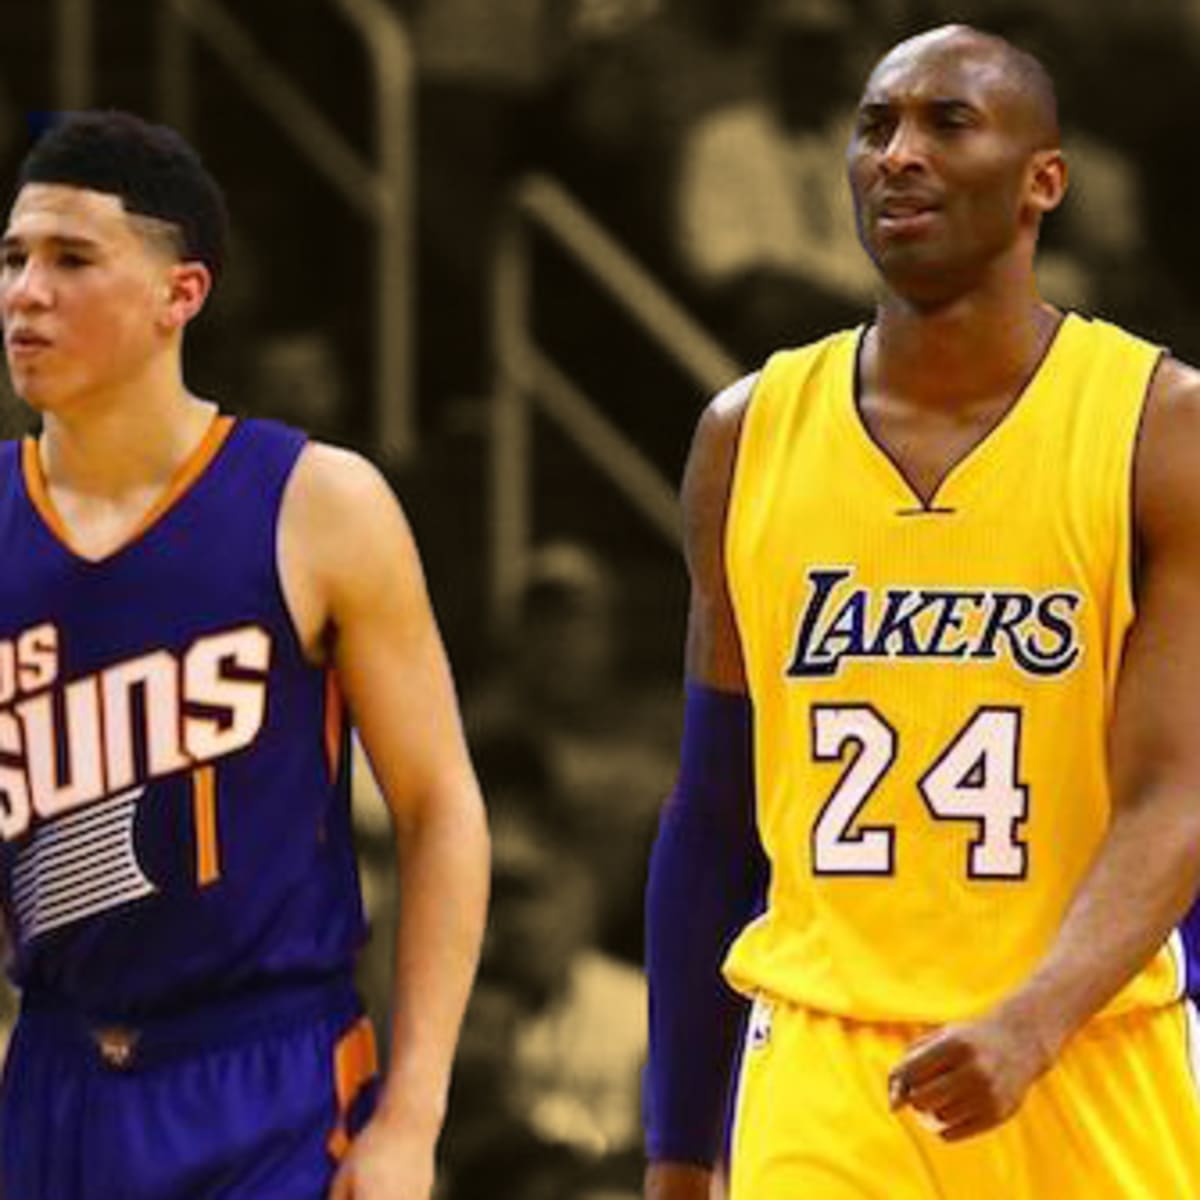 Moore: What does Devin Booker have in common with Jordan and Kobe?